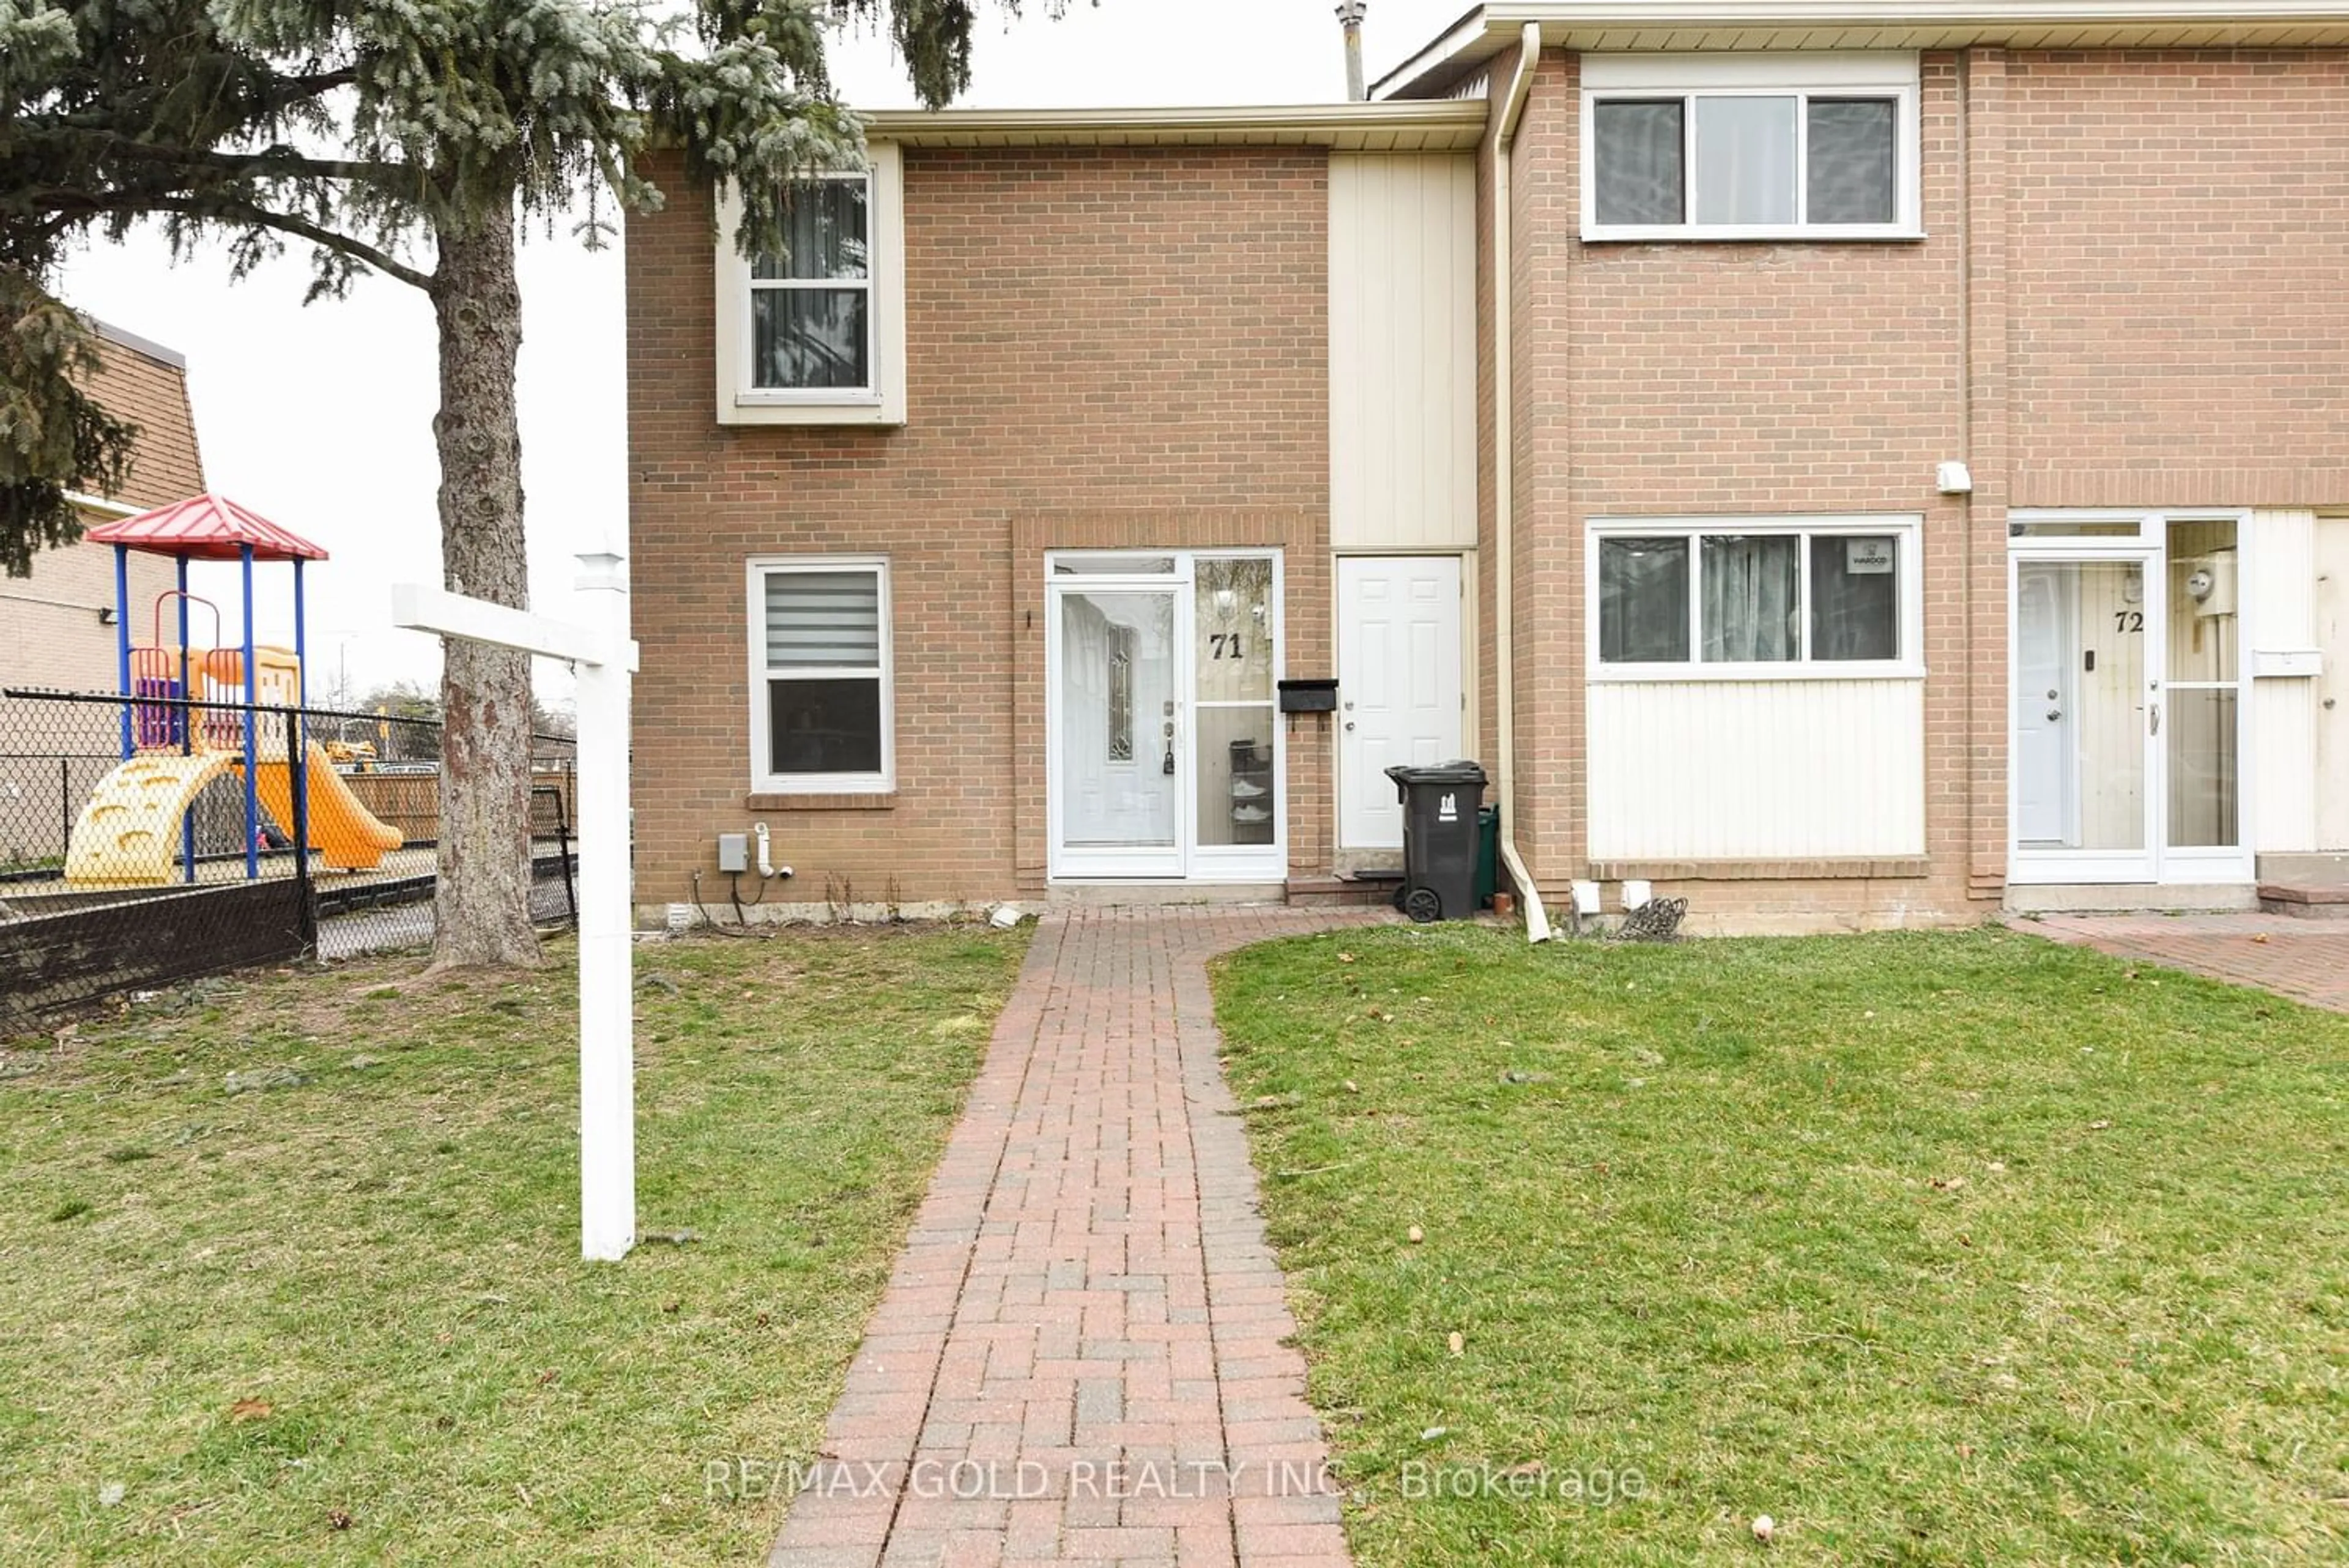 A pic from exterior of the house or condo for 71 Craigleigh Cres, Brampton Ontario M3J 2W3